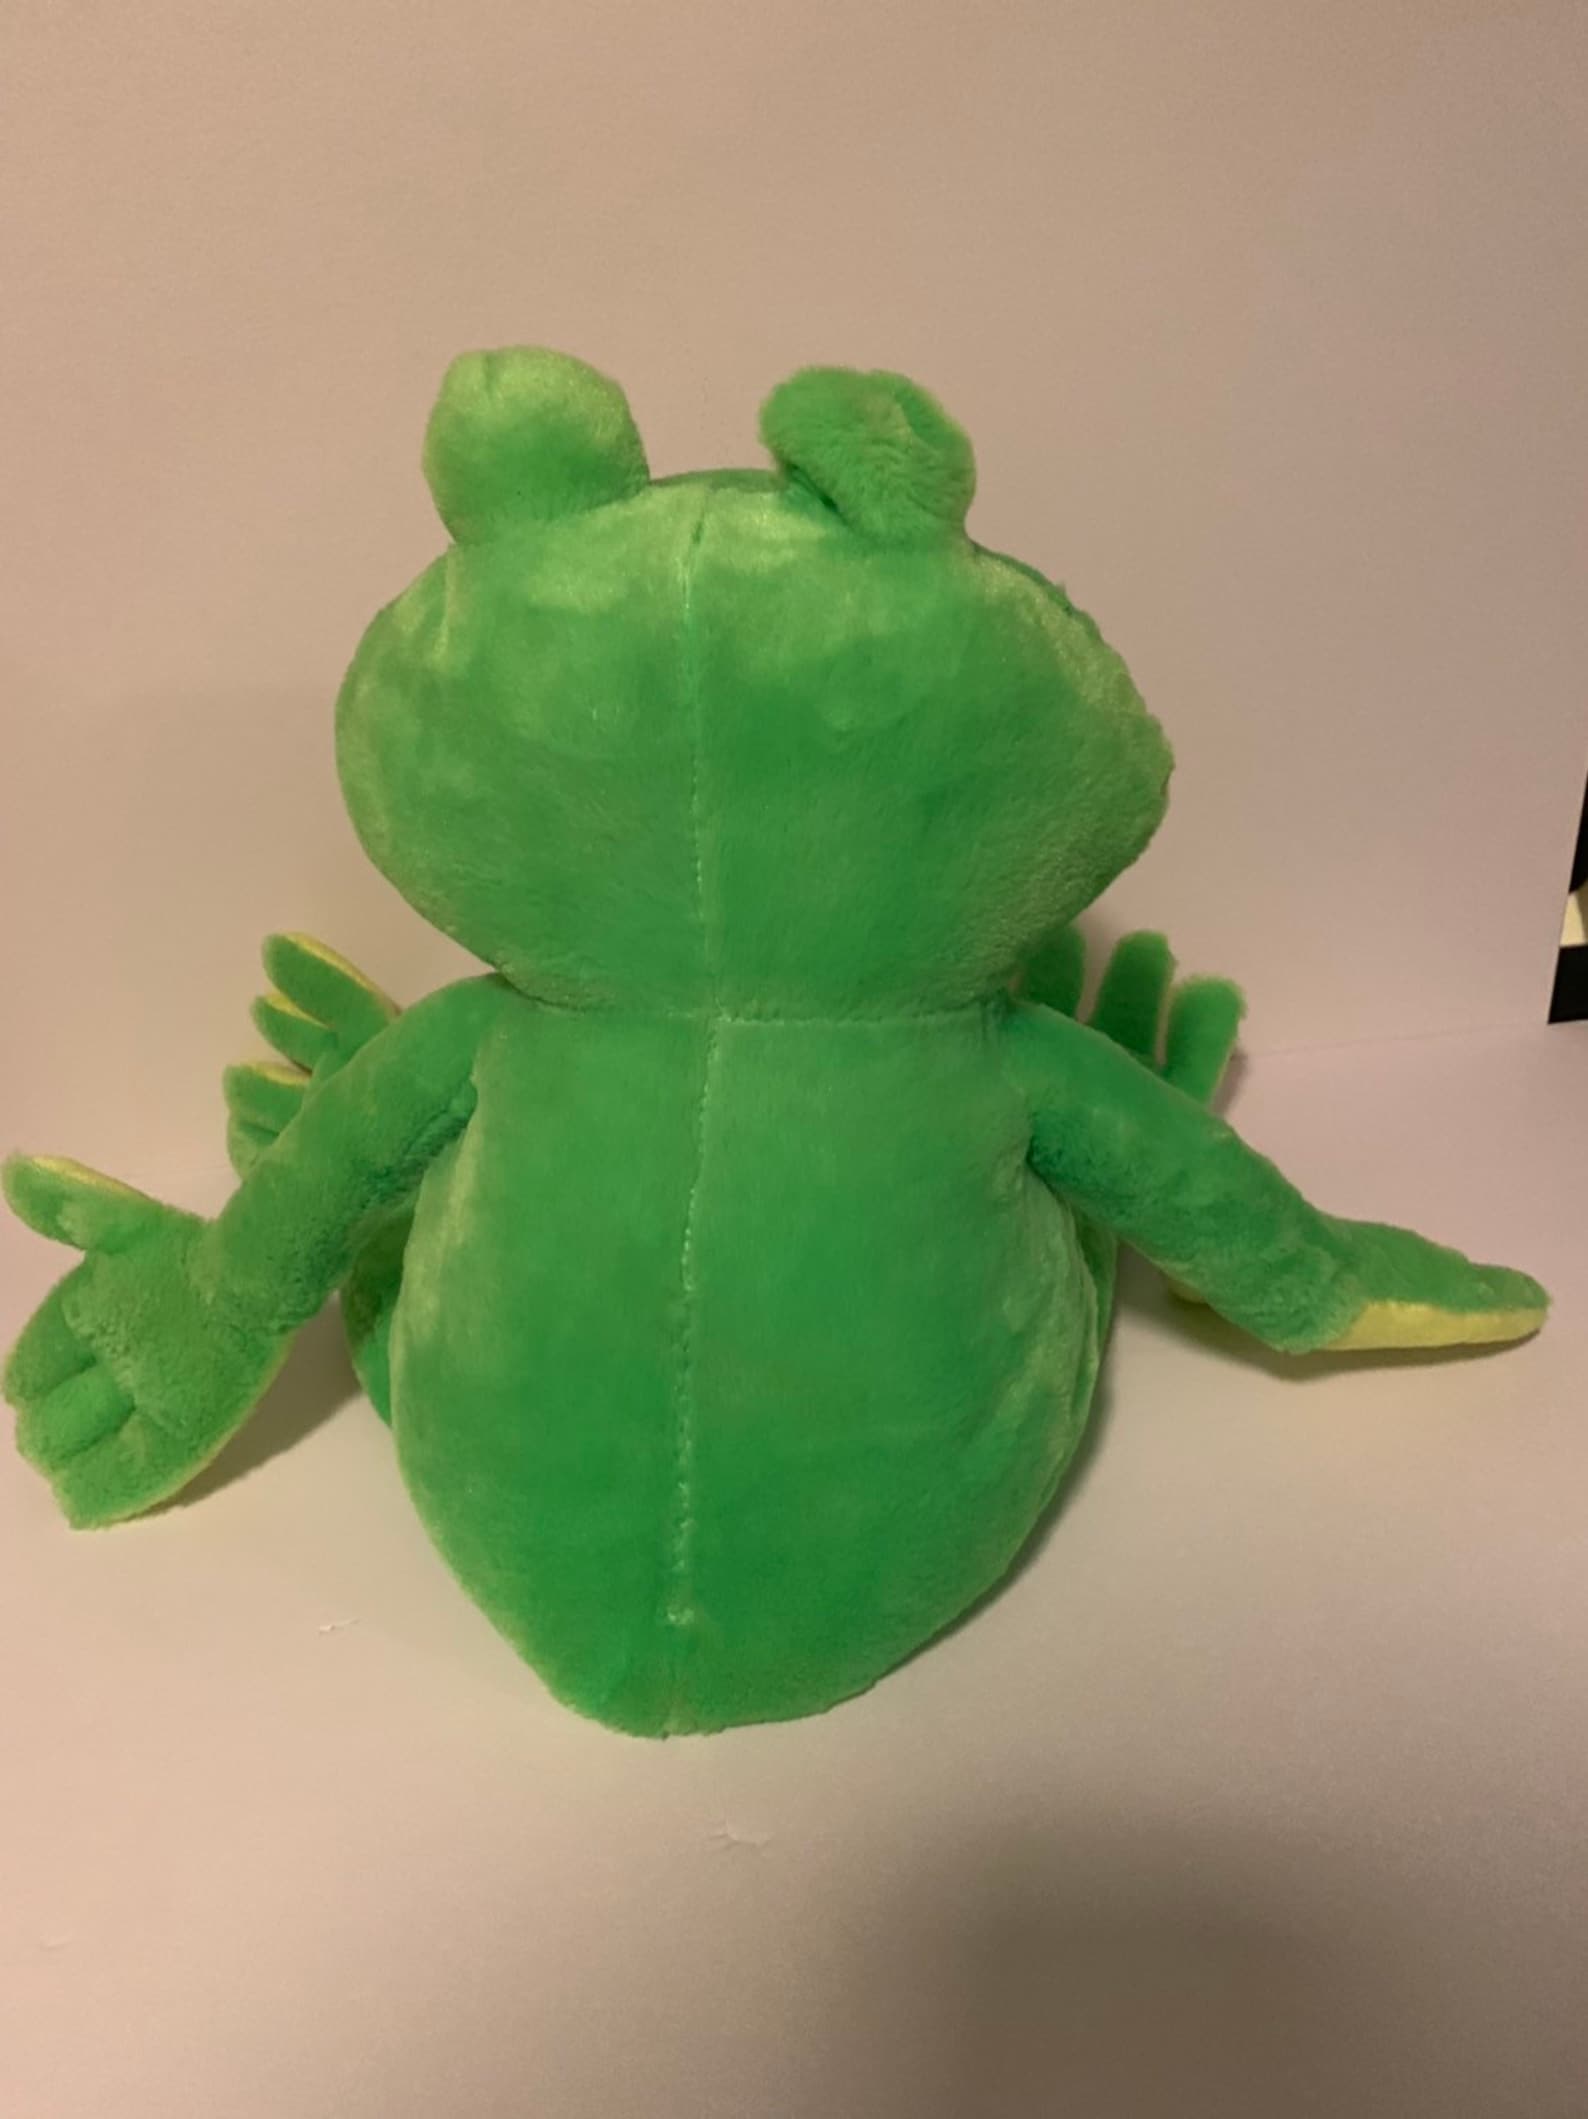 Weighted stuffed animal weighted frog with 5-6 lbs AUTISM | Etsy